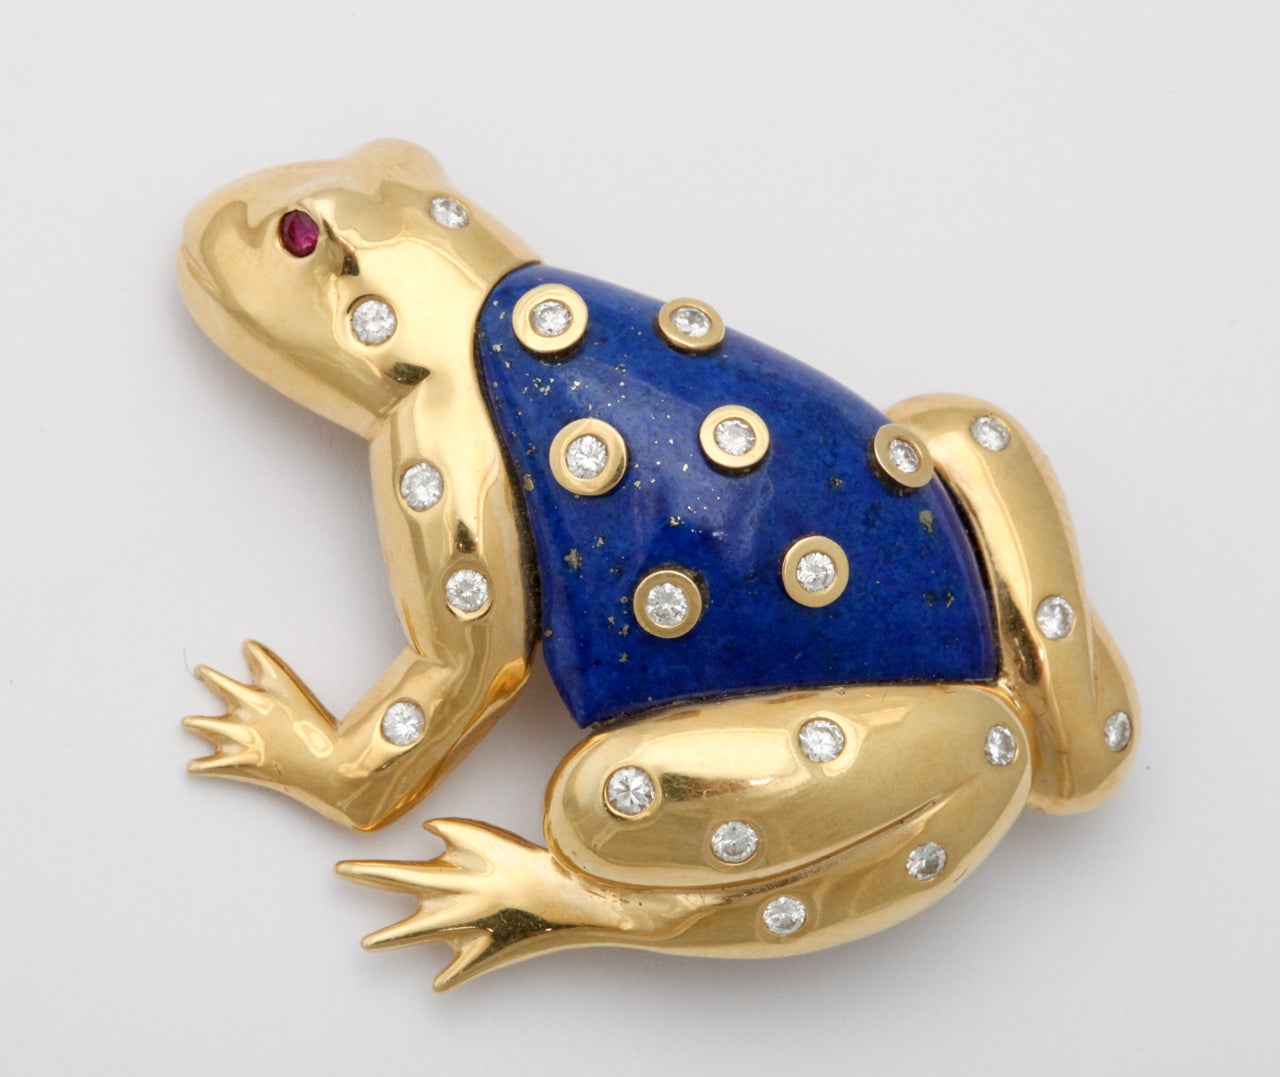 18kt Yellow Gold & Lapis Frog sprinkled with bezel set full cut Diamonds - and just for fun a Ruby eye. You can almost hear him croak!